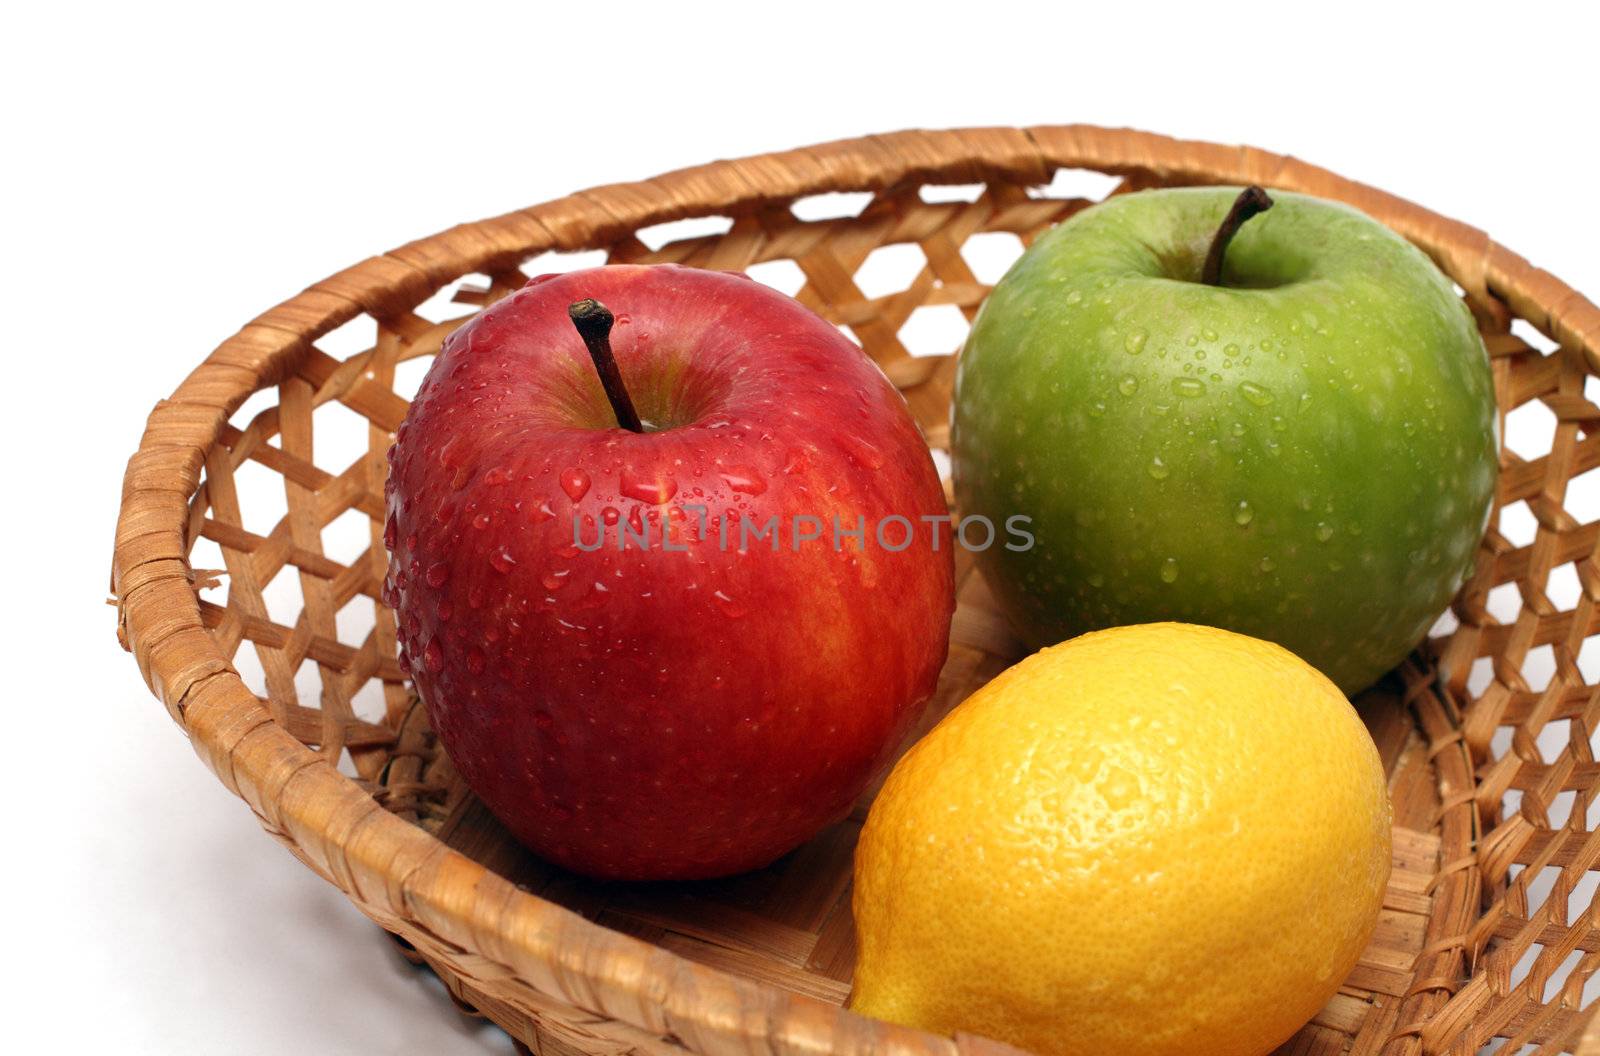 basket with wet fruits isolated on white